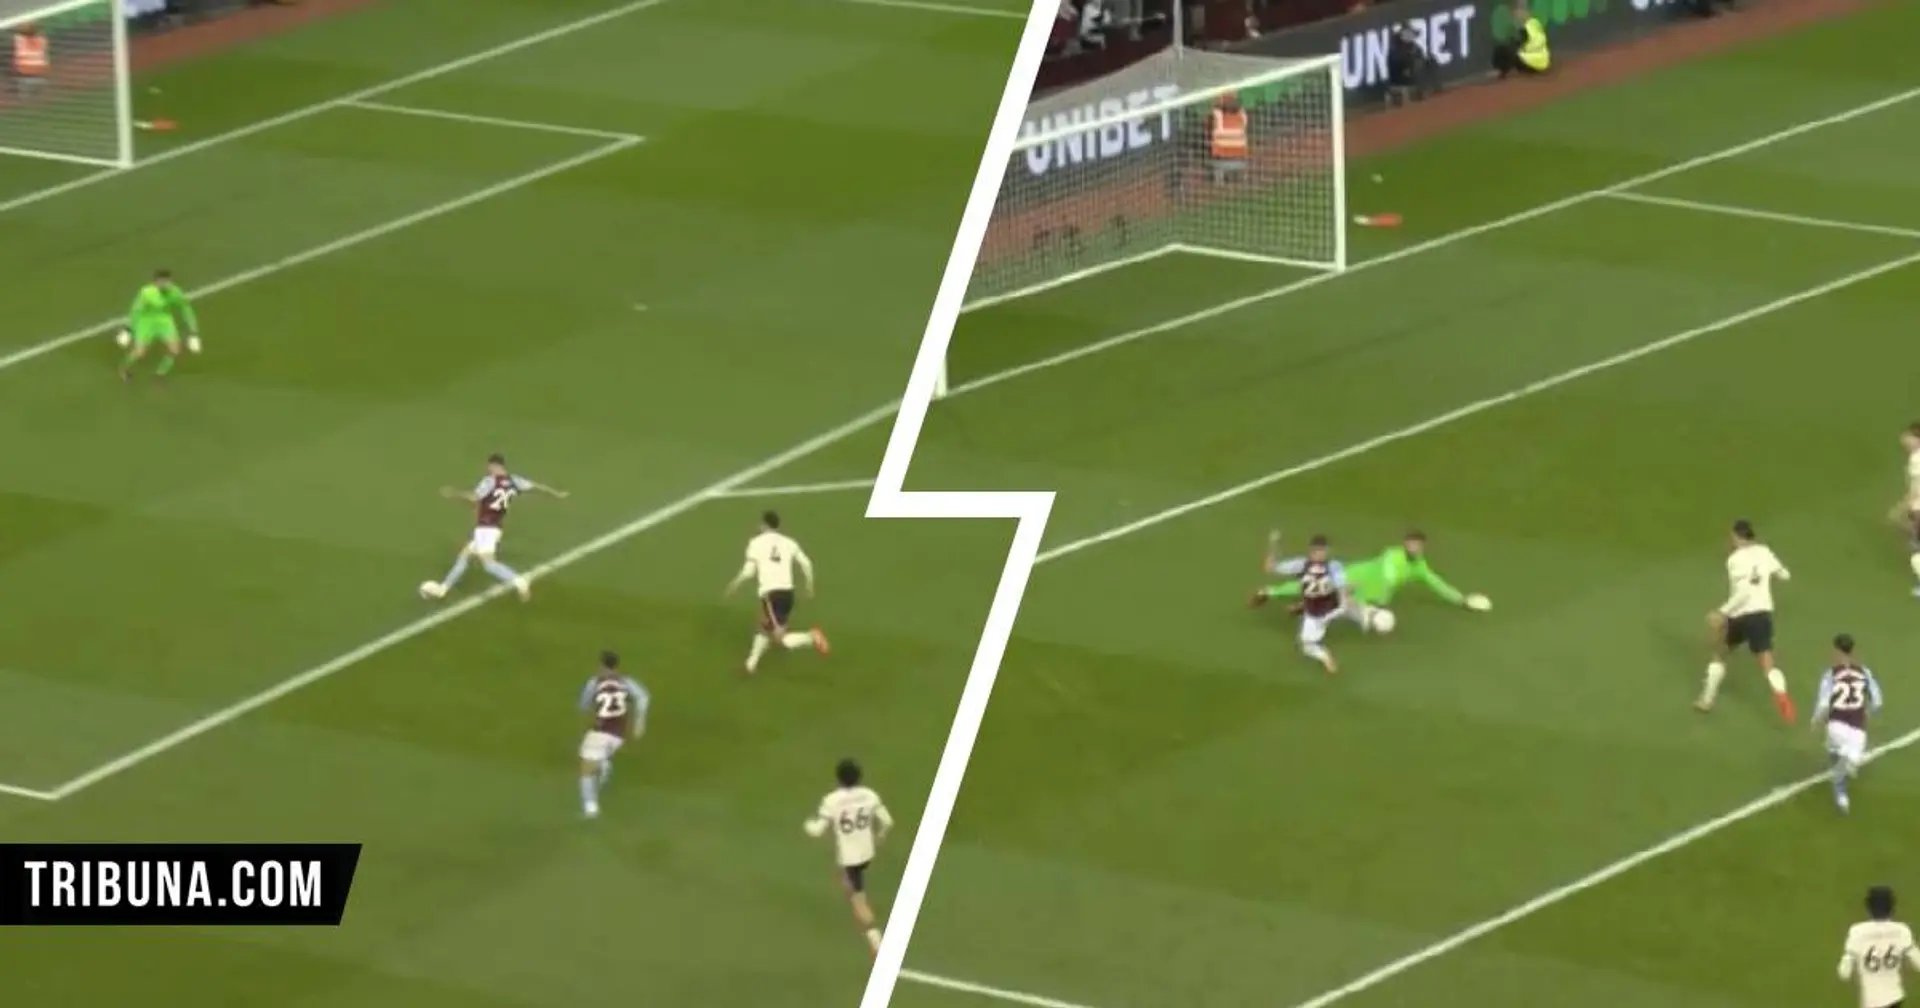 Explained: How Alisson saved Liverpool yet again with epic 1v1 save 